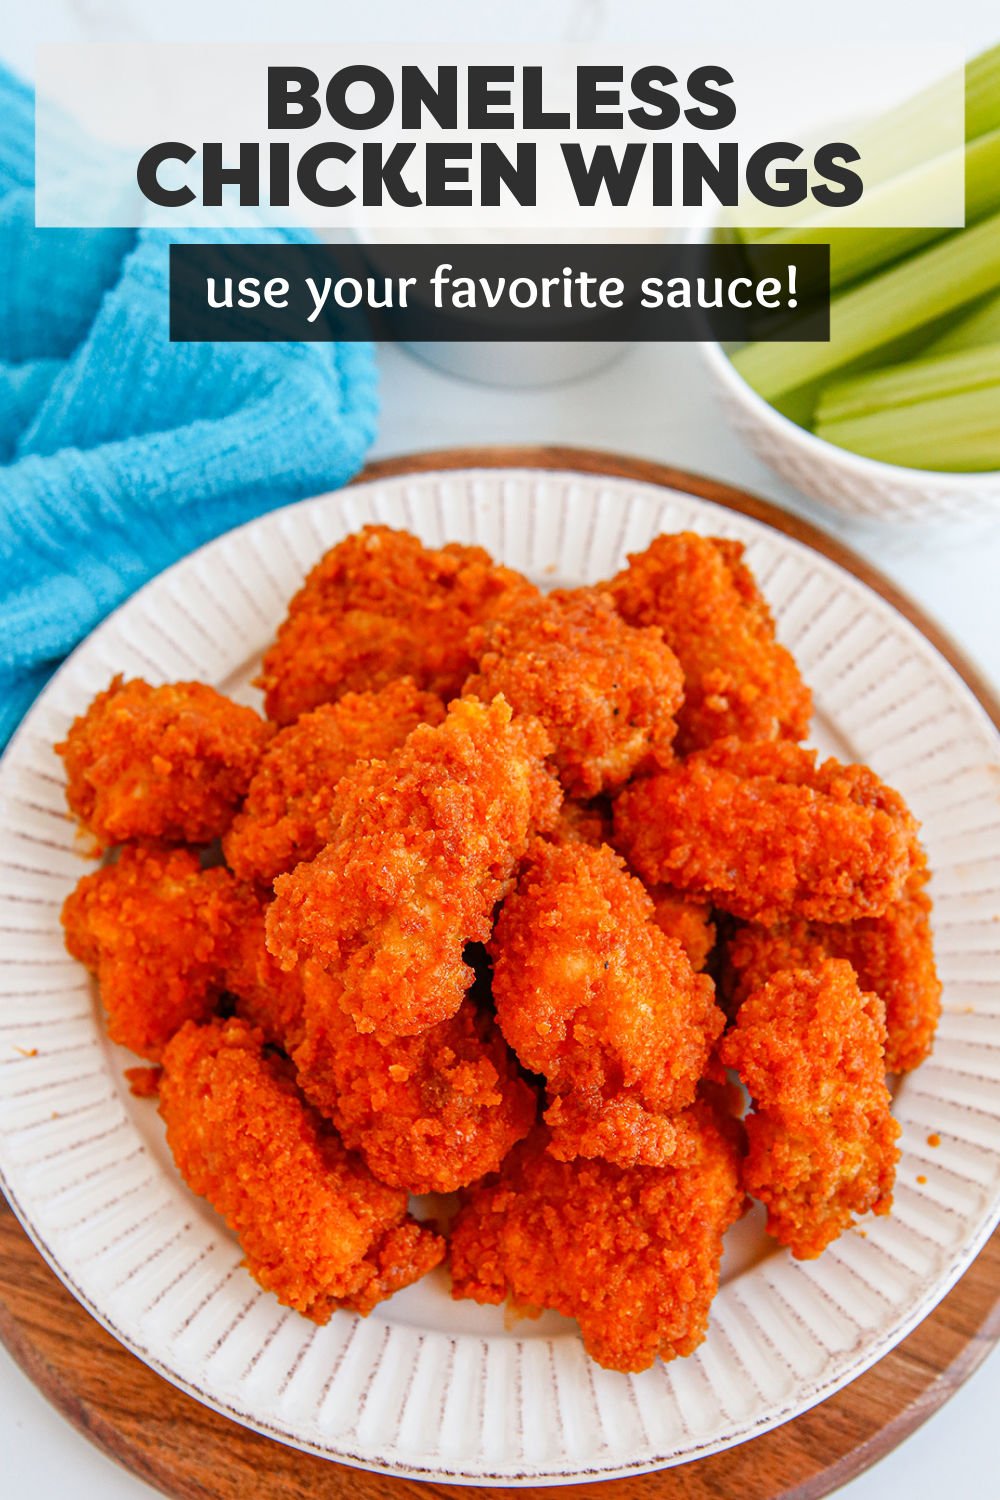 These easy boneless chicken wings are lightly breaded with panko bread crumbs and then fried until golden brown. Toss them in your favorite sauce and enjoy! | www.persnicketyplates.com